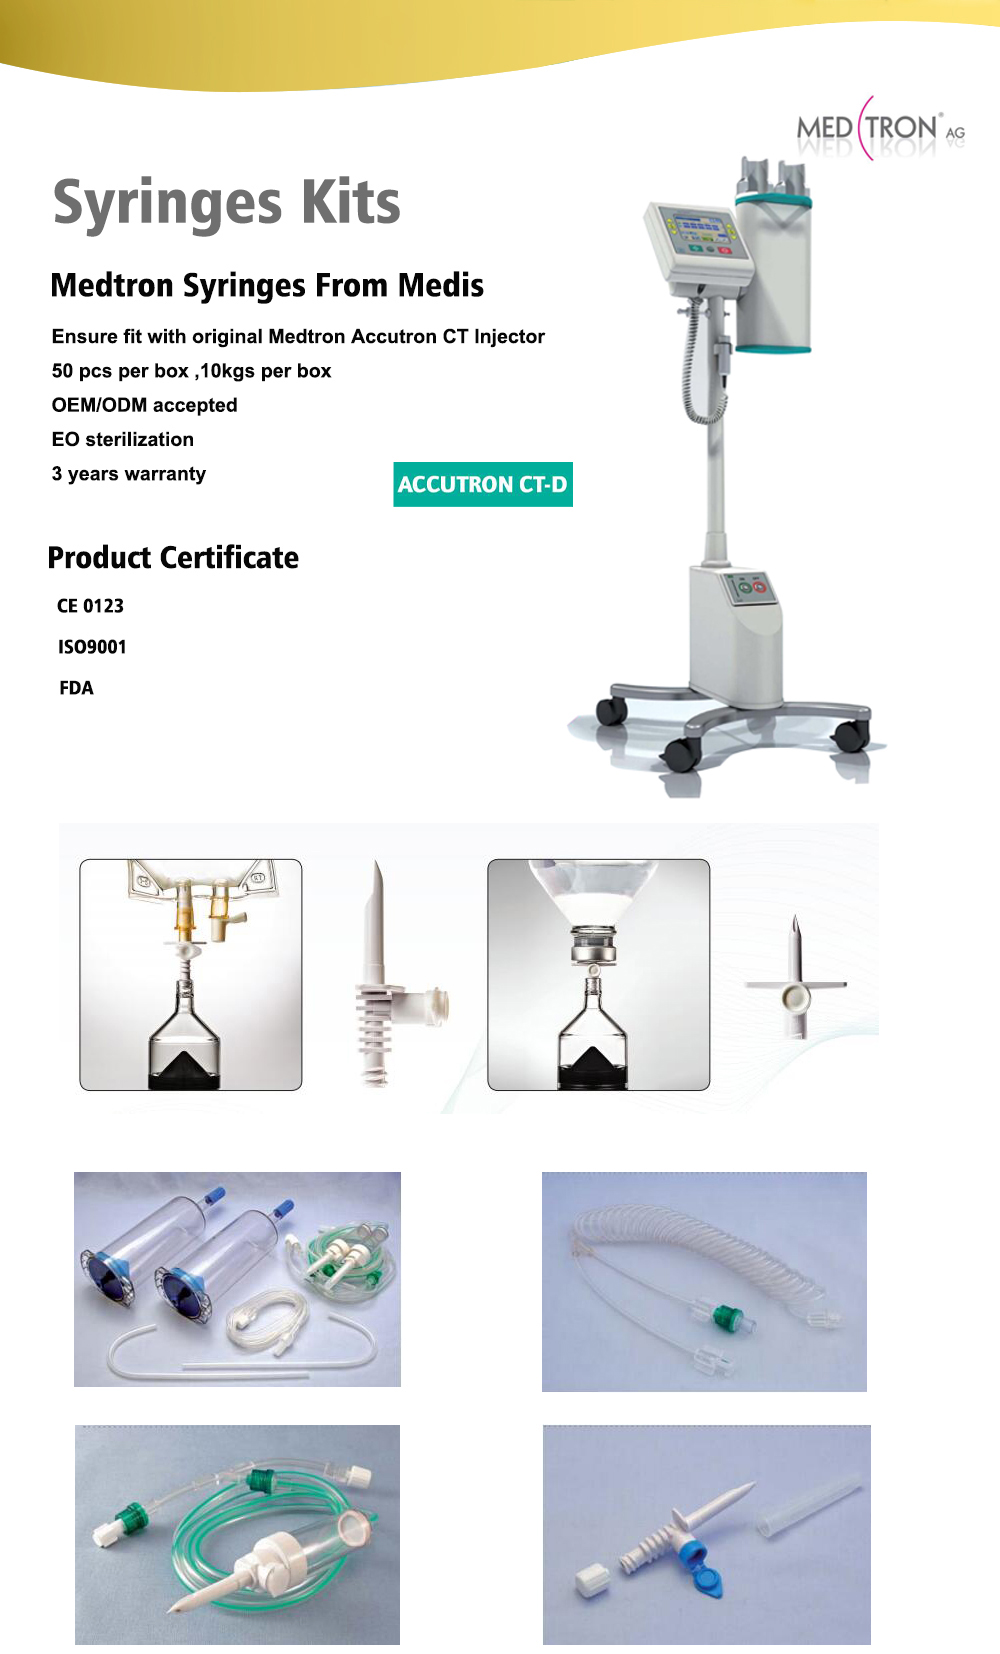 ct contrast injectors -200ml syringes-medtron accutron ct d -high pressure injector pump-high pressure syringes-high pressure angiographic injector syringes-syirnge injector-automatic syringe injector-high pressure syringes-angiographic syringes -contrast injector for ct -ct injectors 